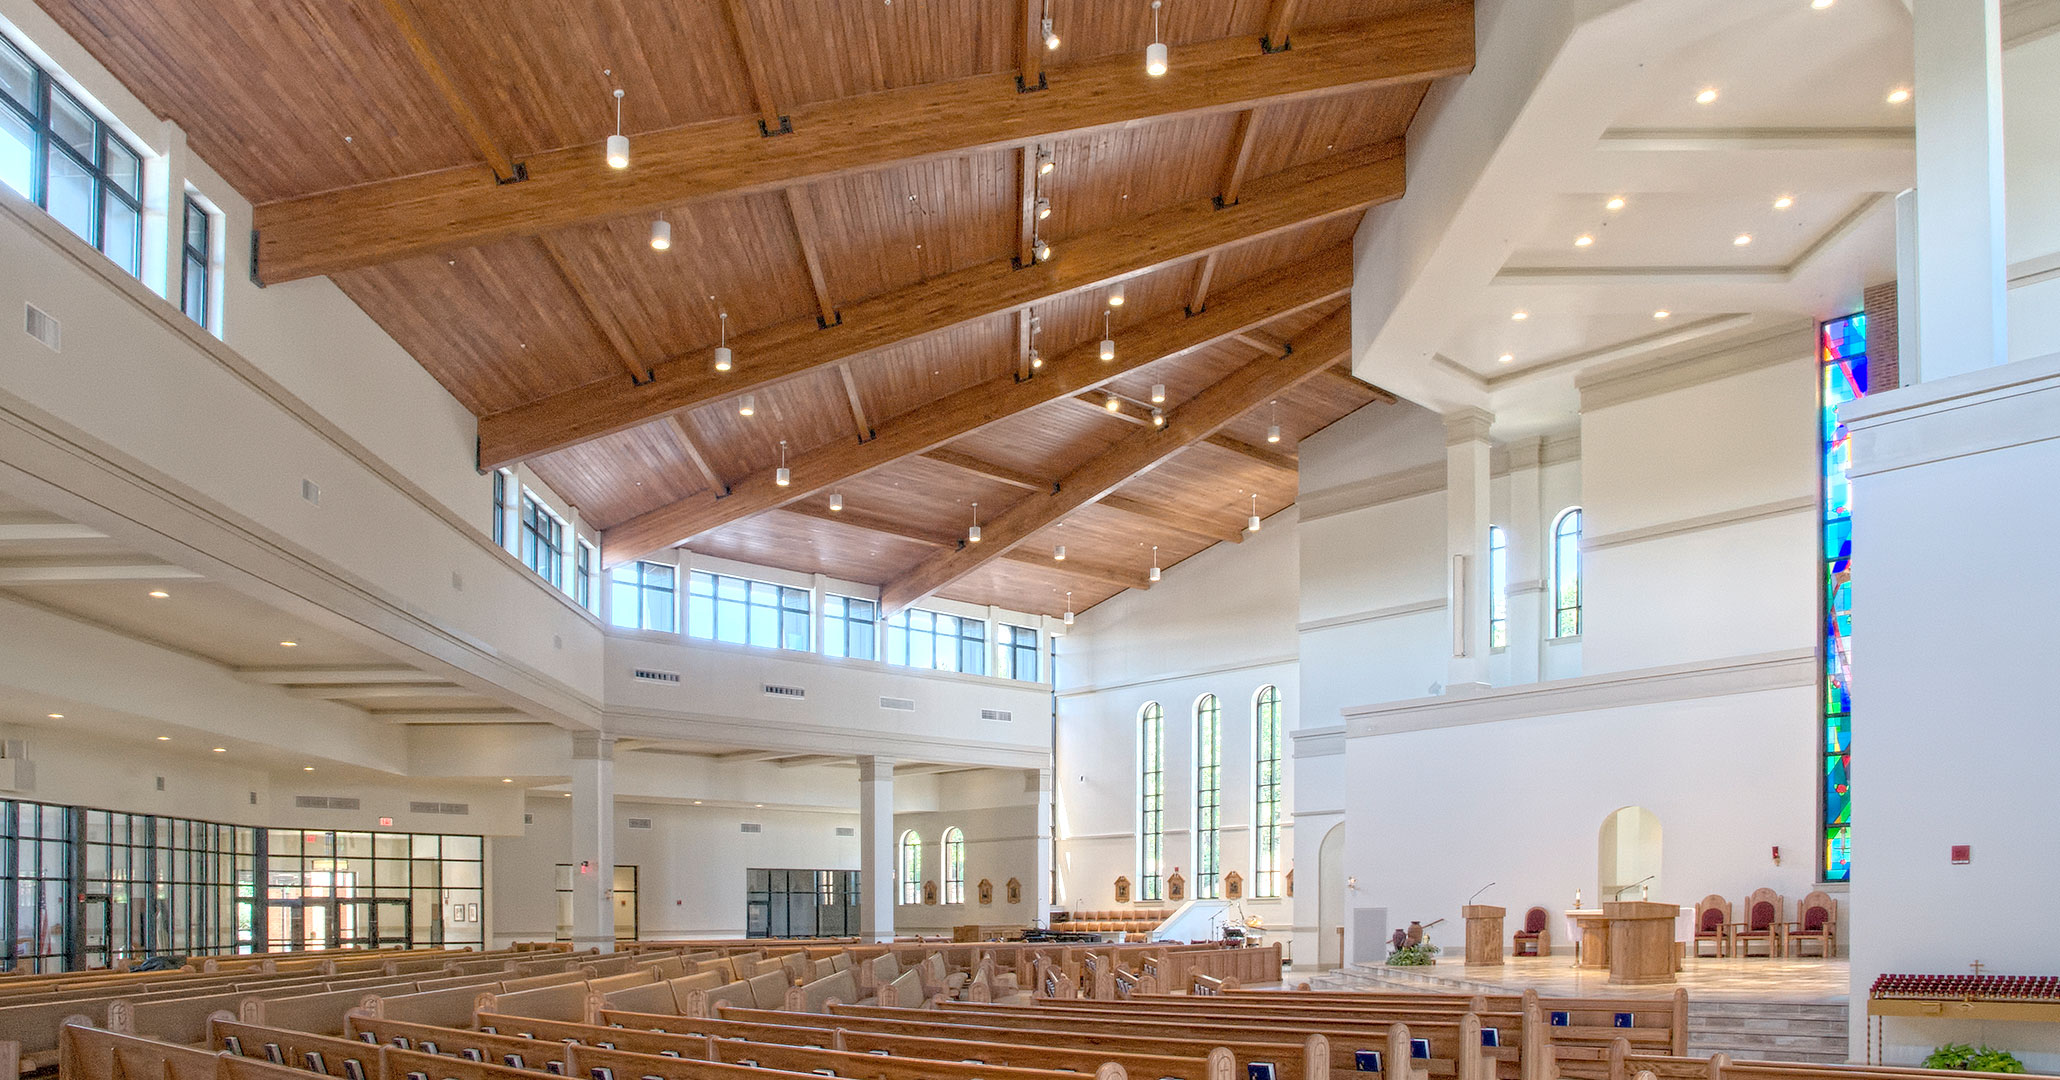 Boudreaux worked with St. Therese in Mooresville, NC to provide interior design services for the Catholic Church.